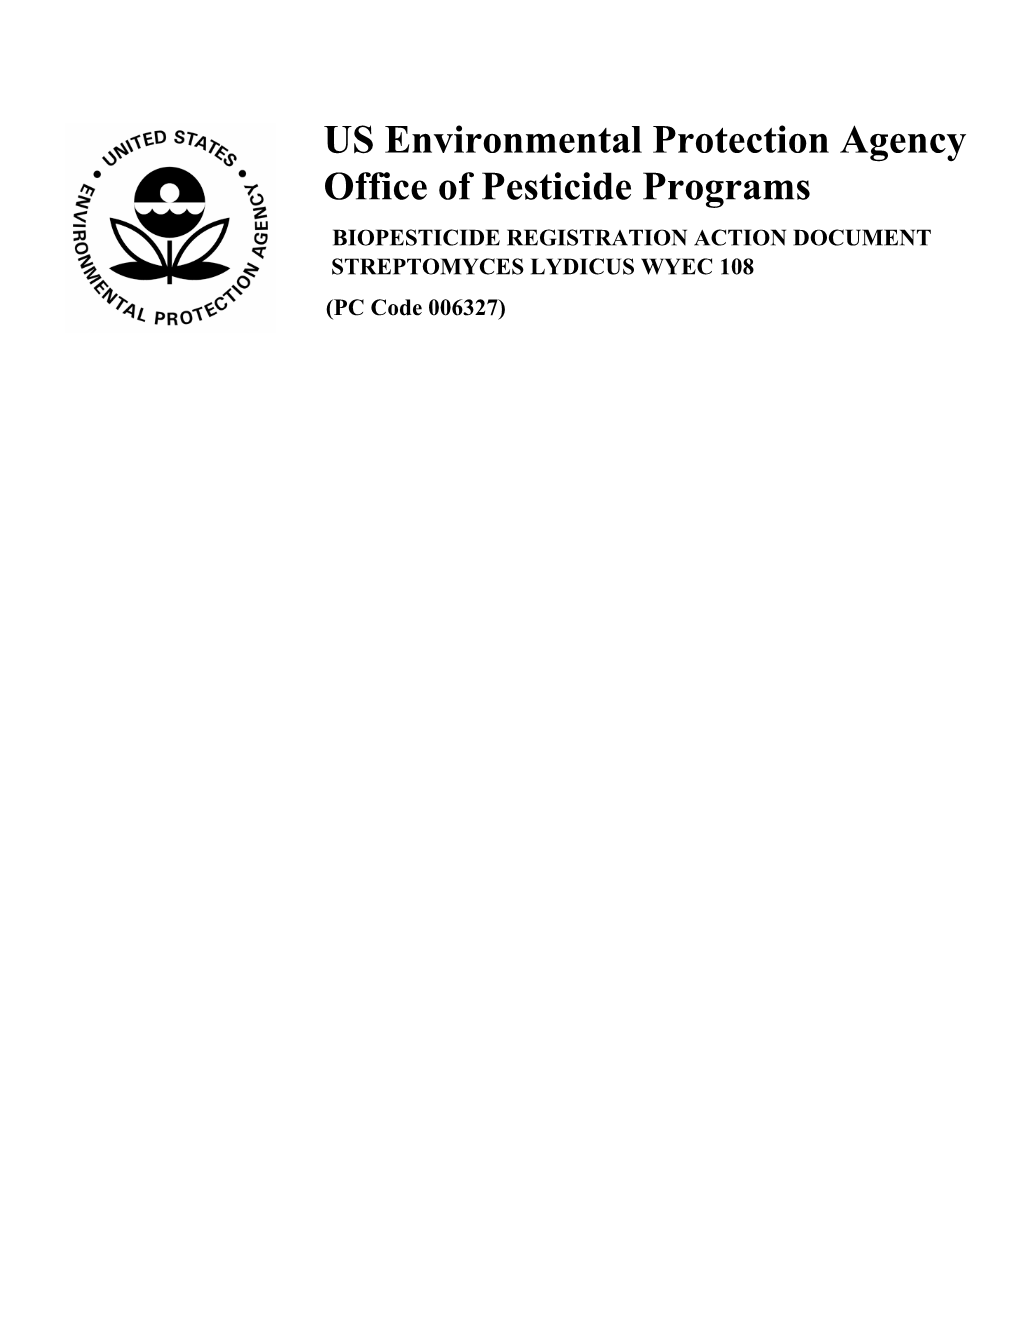 Technical Document for Streptomyces Lydicus WYEC 108 Also Referred To